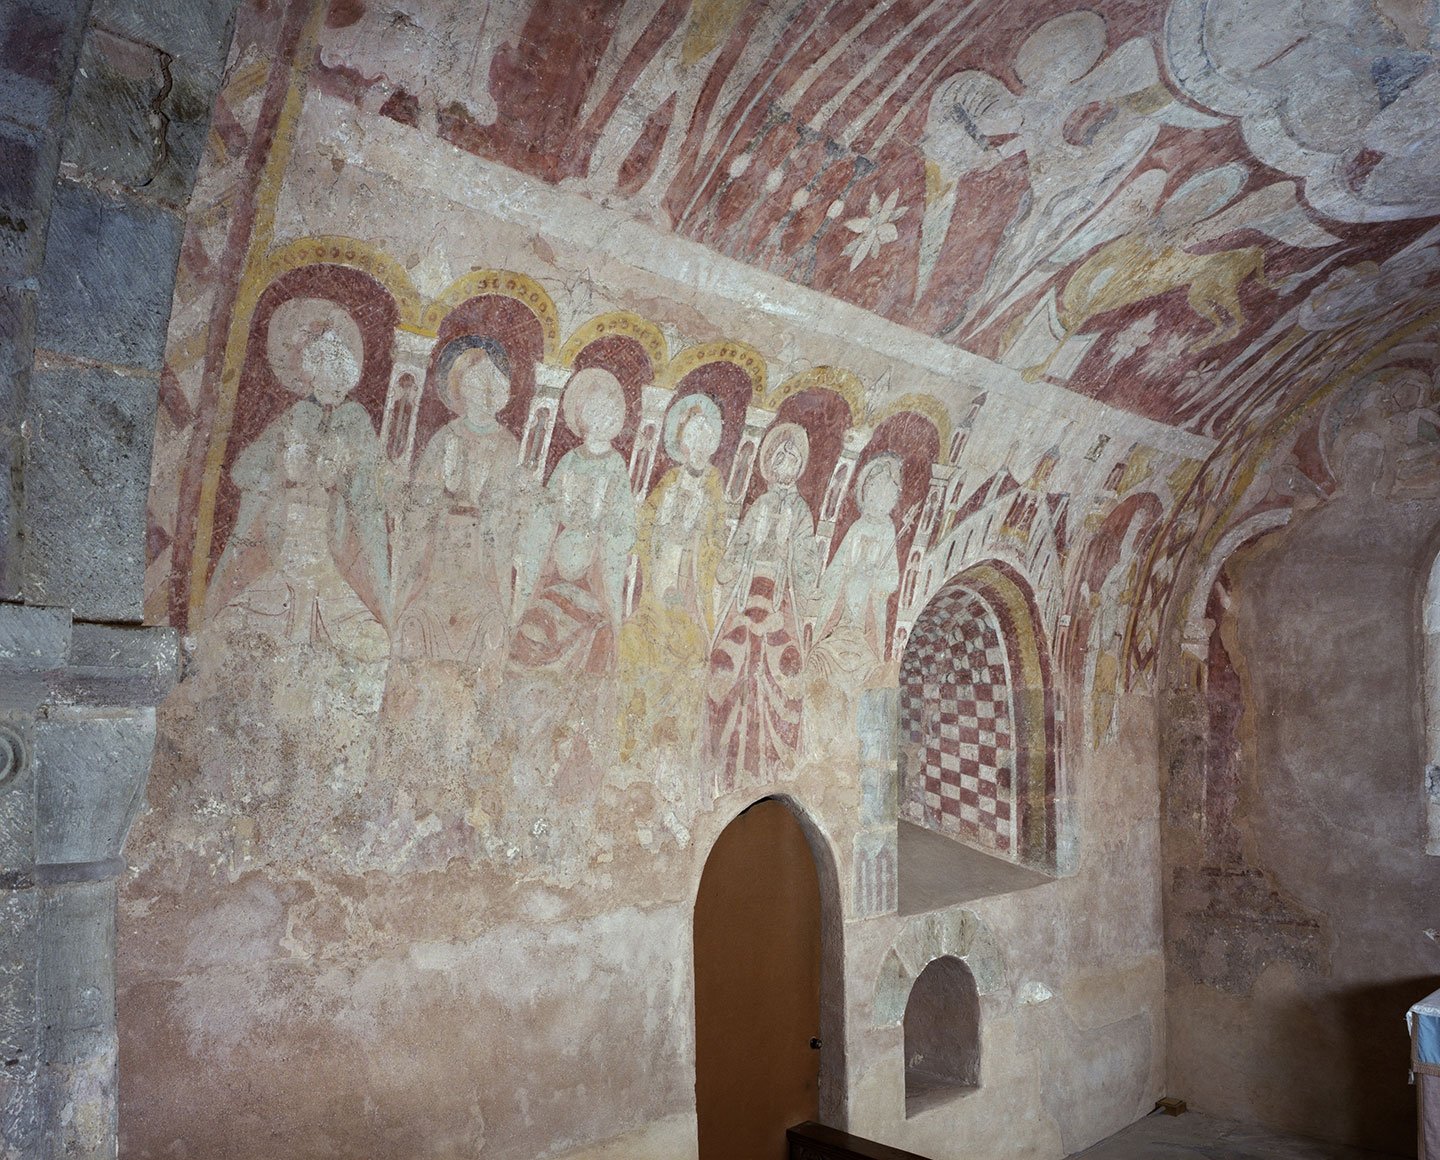 Important 12th-century paintings on the north wall of the chancel, St Mary’s Church, Kempley, Gloucestershire